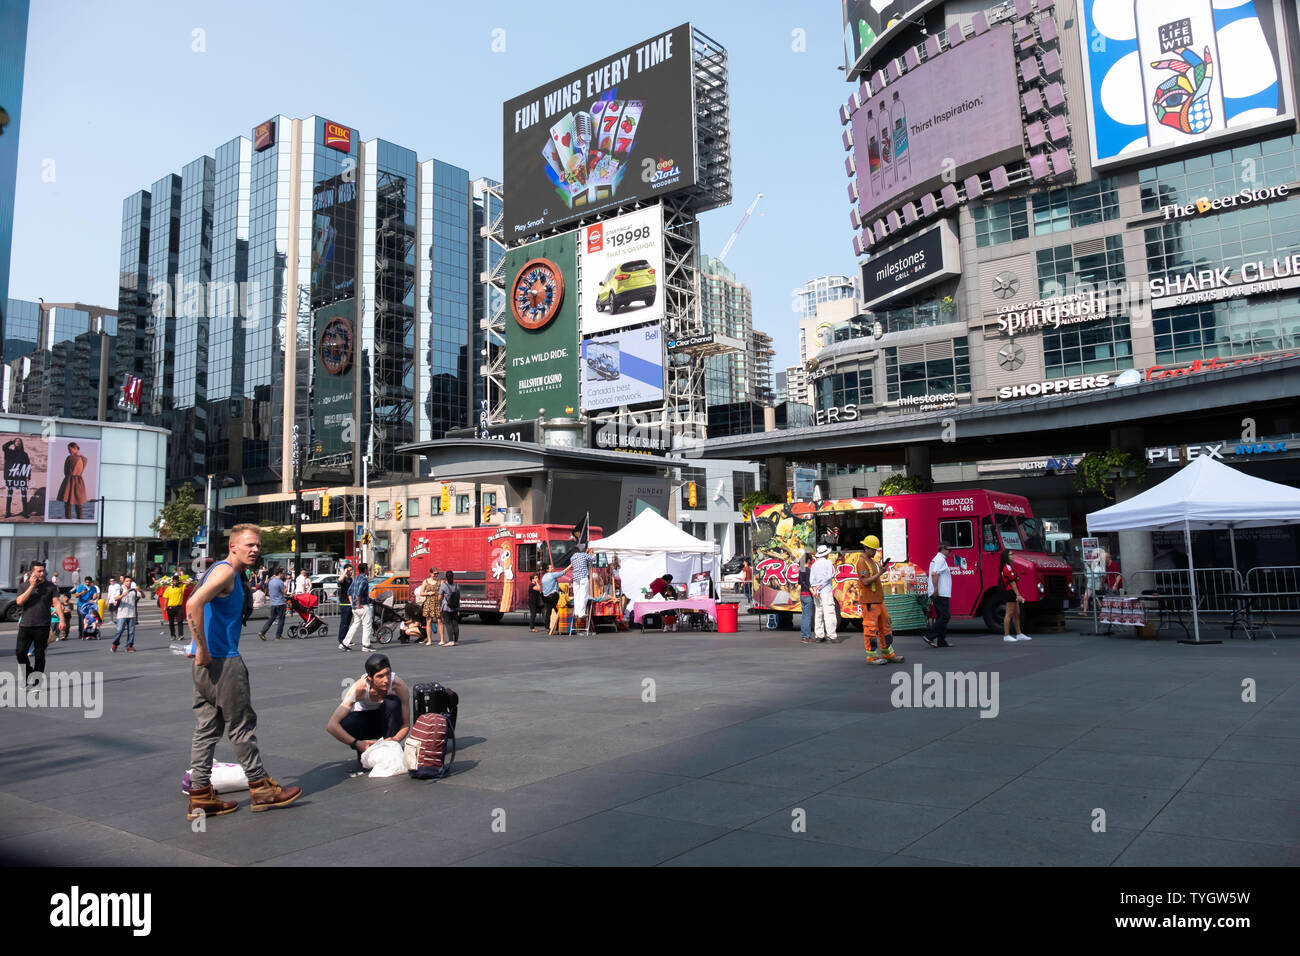 Toronto, Ontario, Canada, city life in the summer with activities at Dundas Square and Eaton Centre and Yonge Street, summer festivals Stock Photo